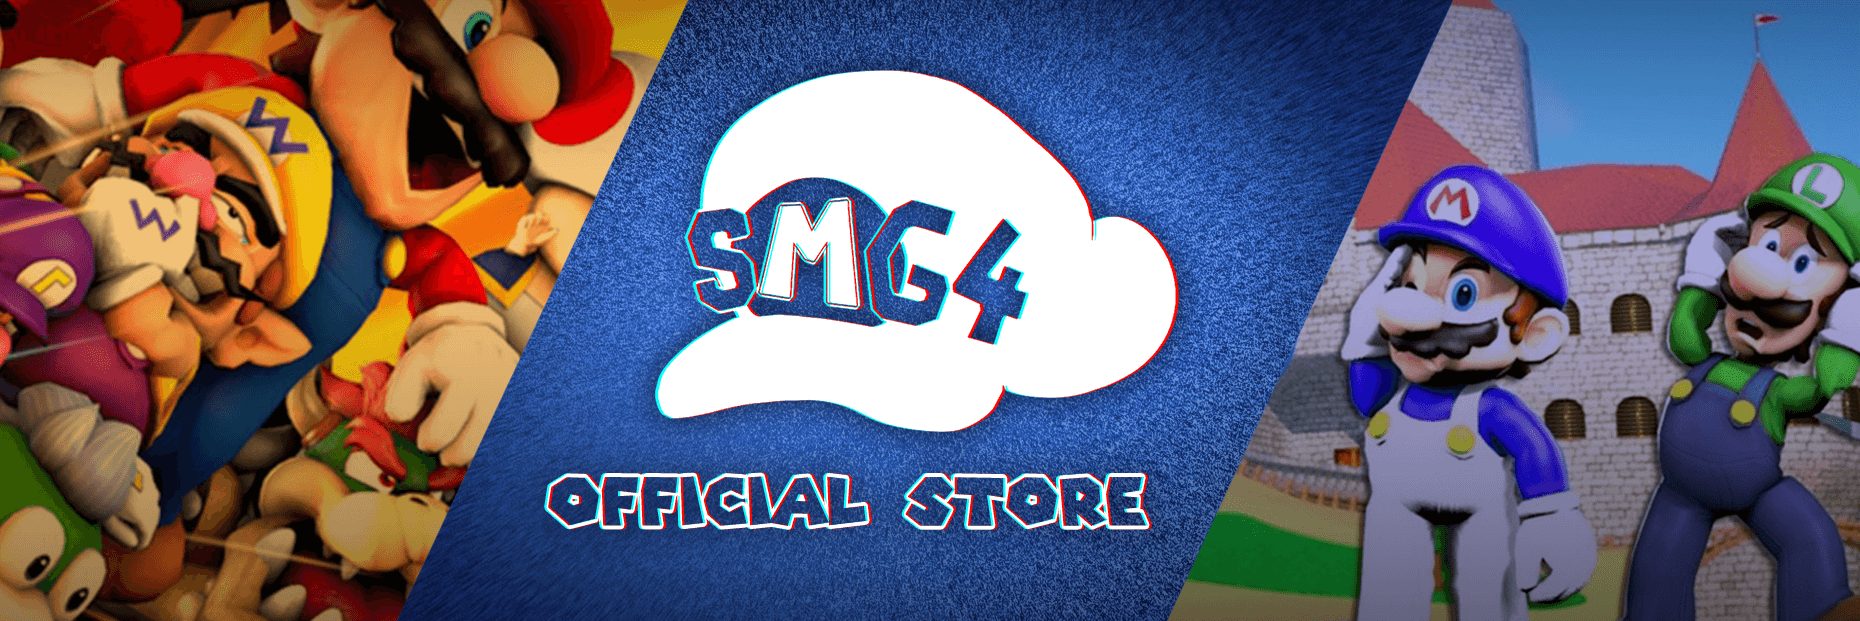 https://static.wikia.nocookie.net/supermarioglitchy4/images/a/aa/SMG4_Official_Store_Banner.png/revision/latest?cb=20191102193352